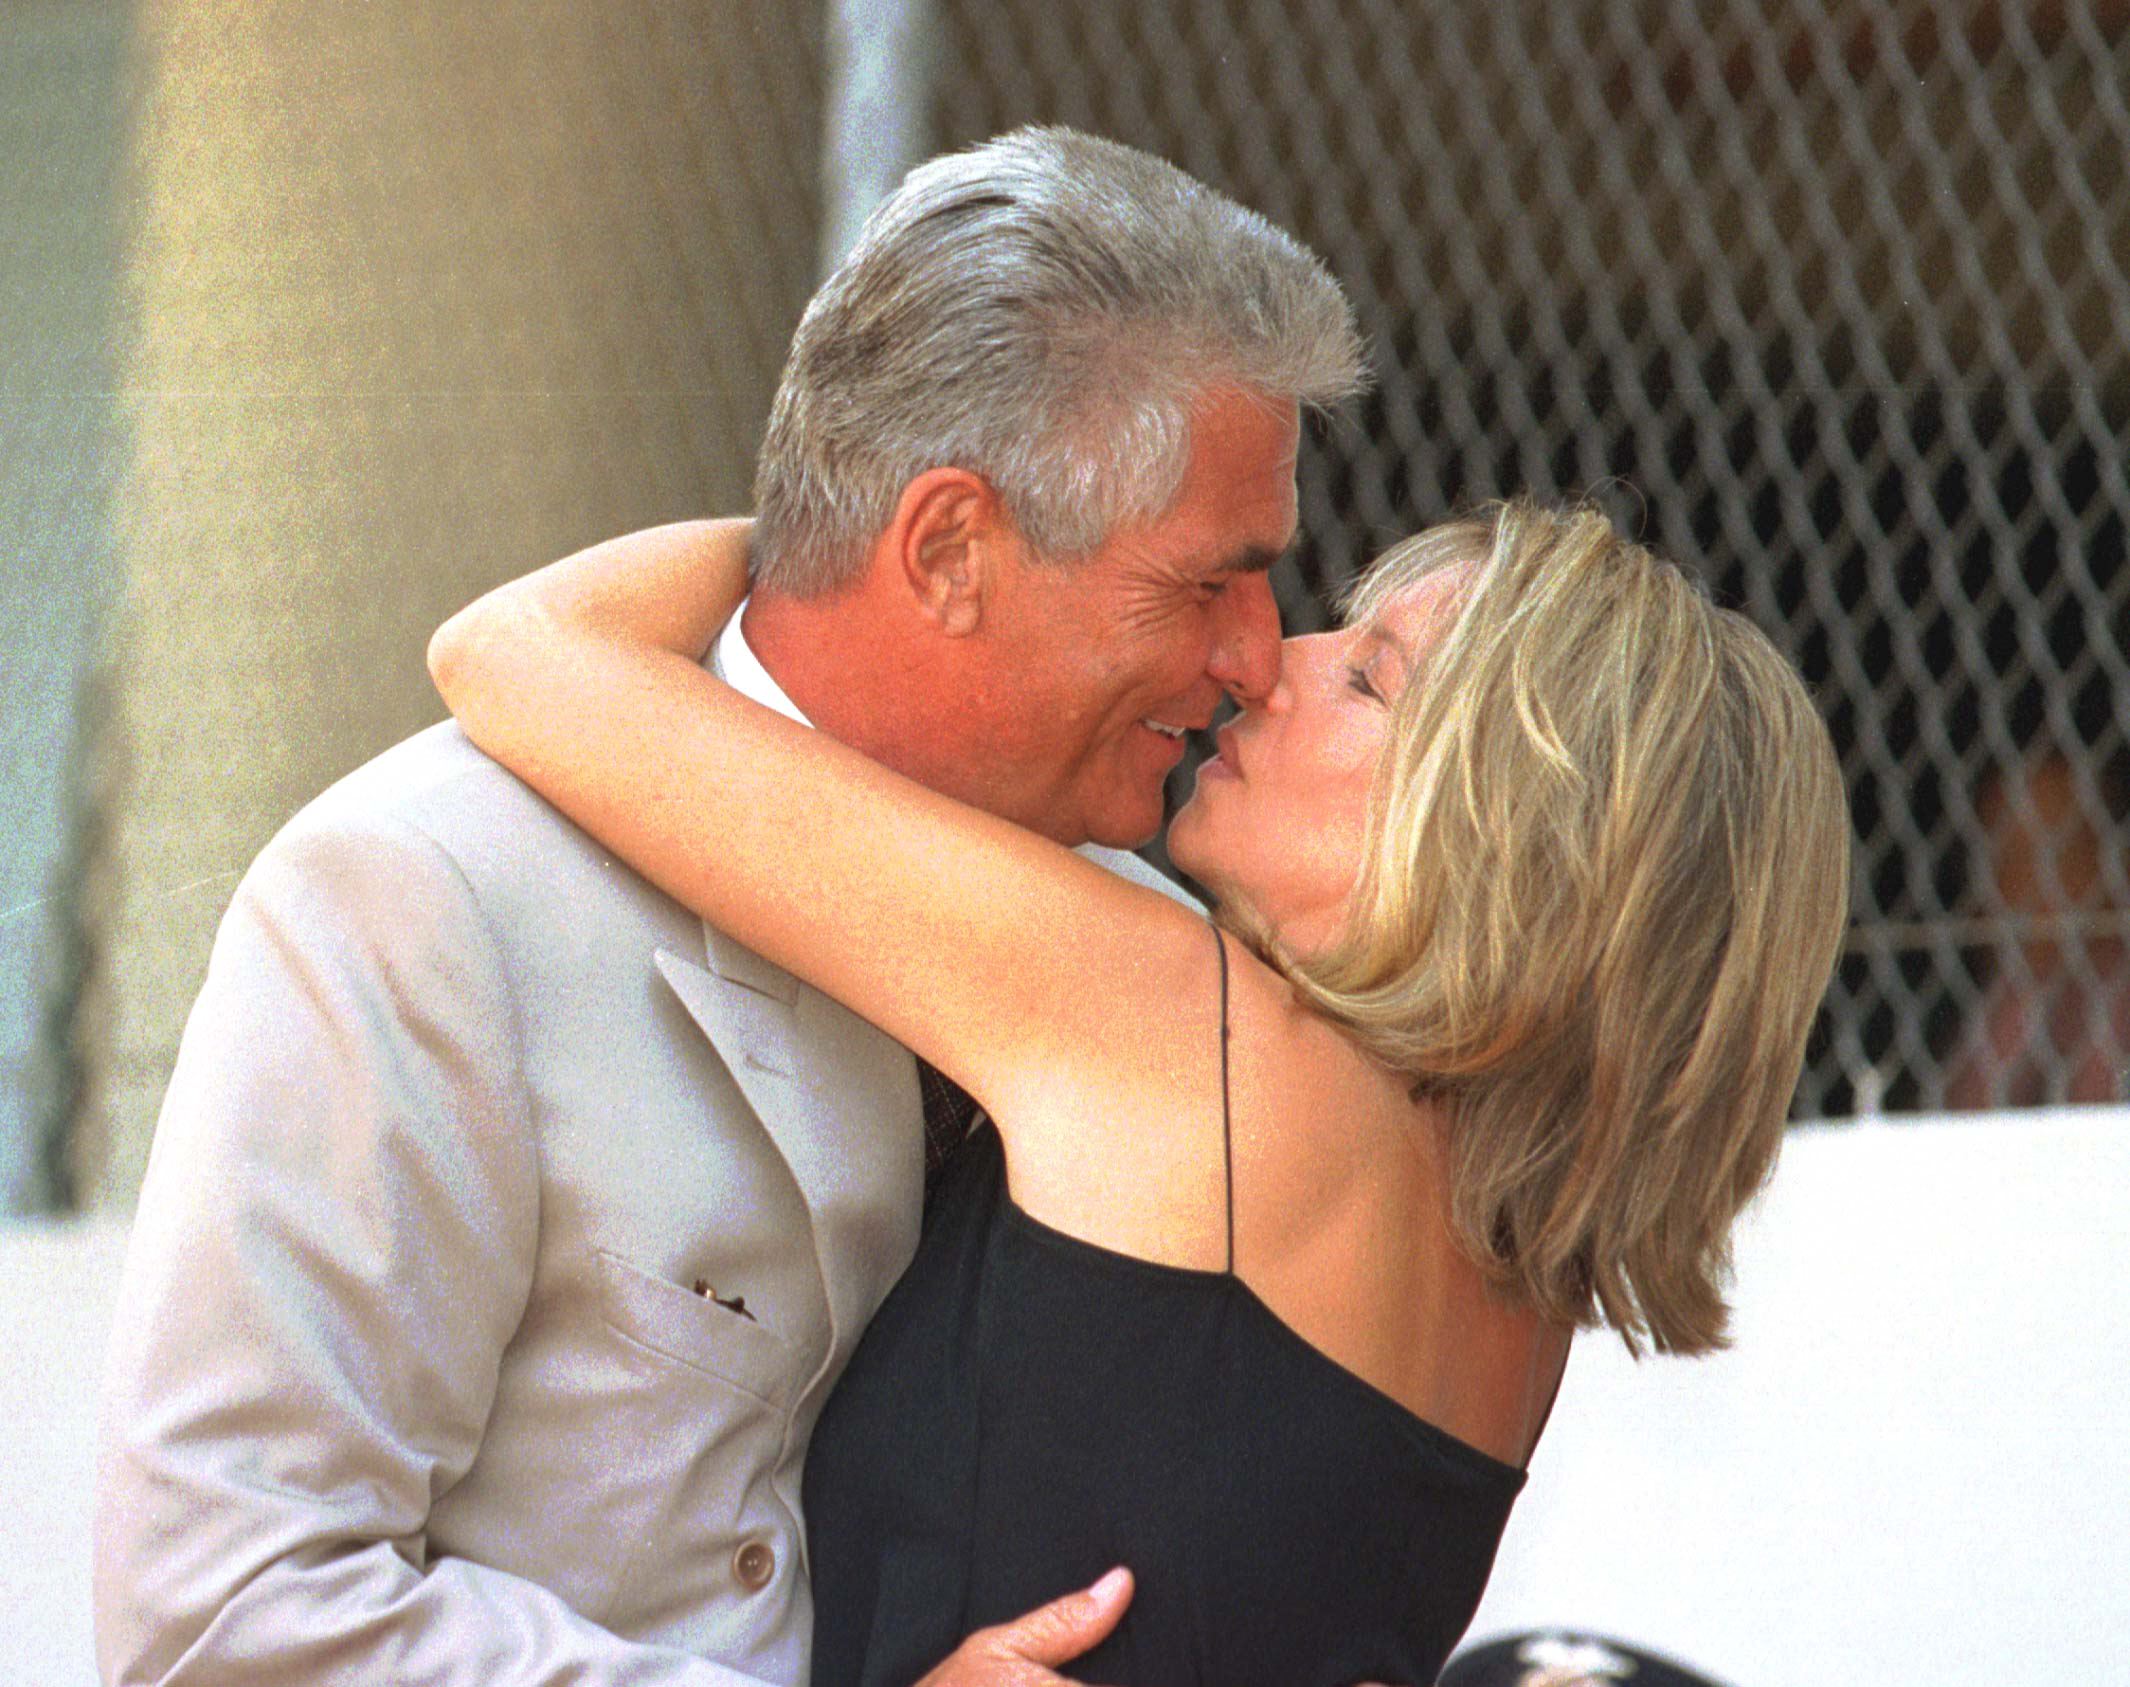 US singer and actress Barbra Streisand gives her husband actor James Brolin a kiss during his Hollywood star installation on the Walk of Fame in Hollywood, California, on August 27 1998 | Source: Getty Images